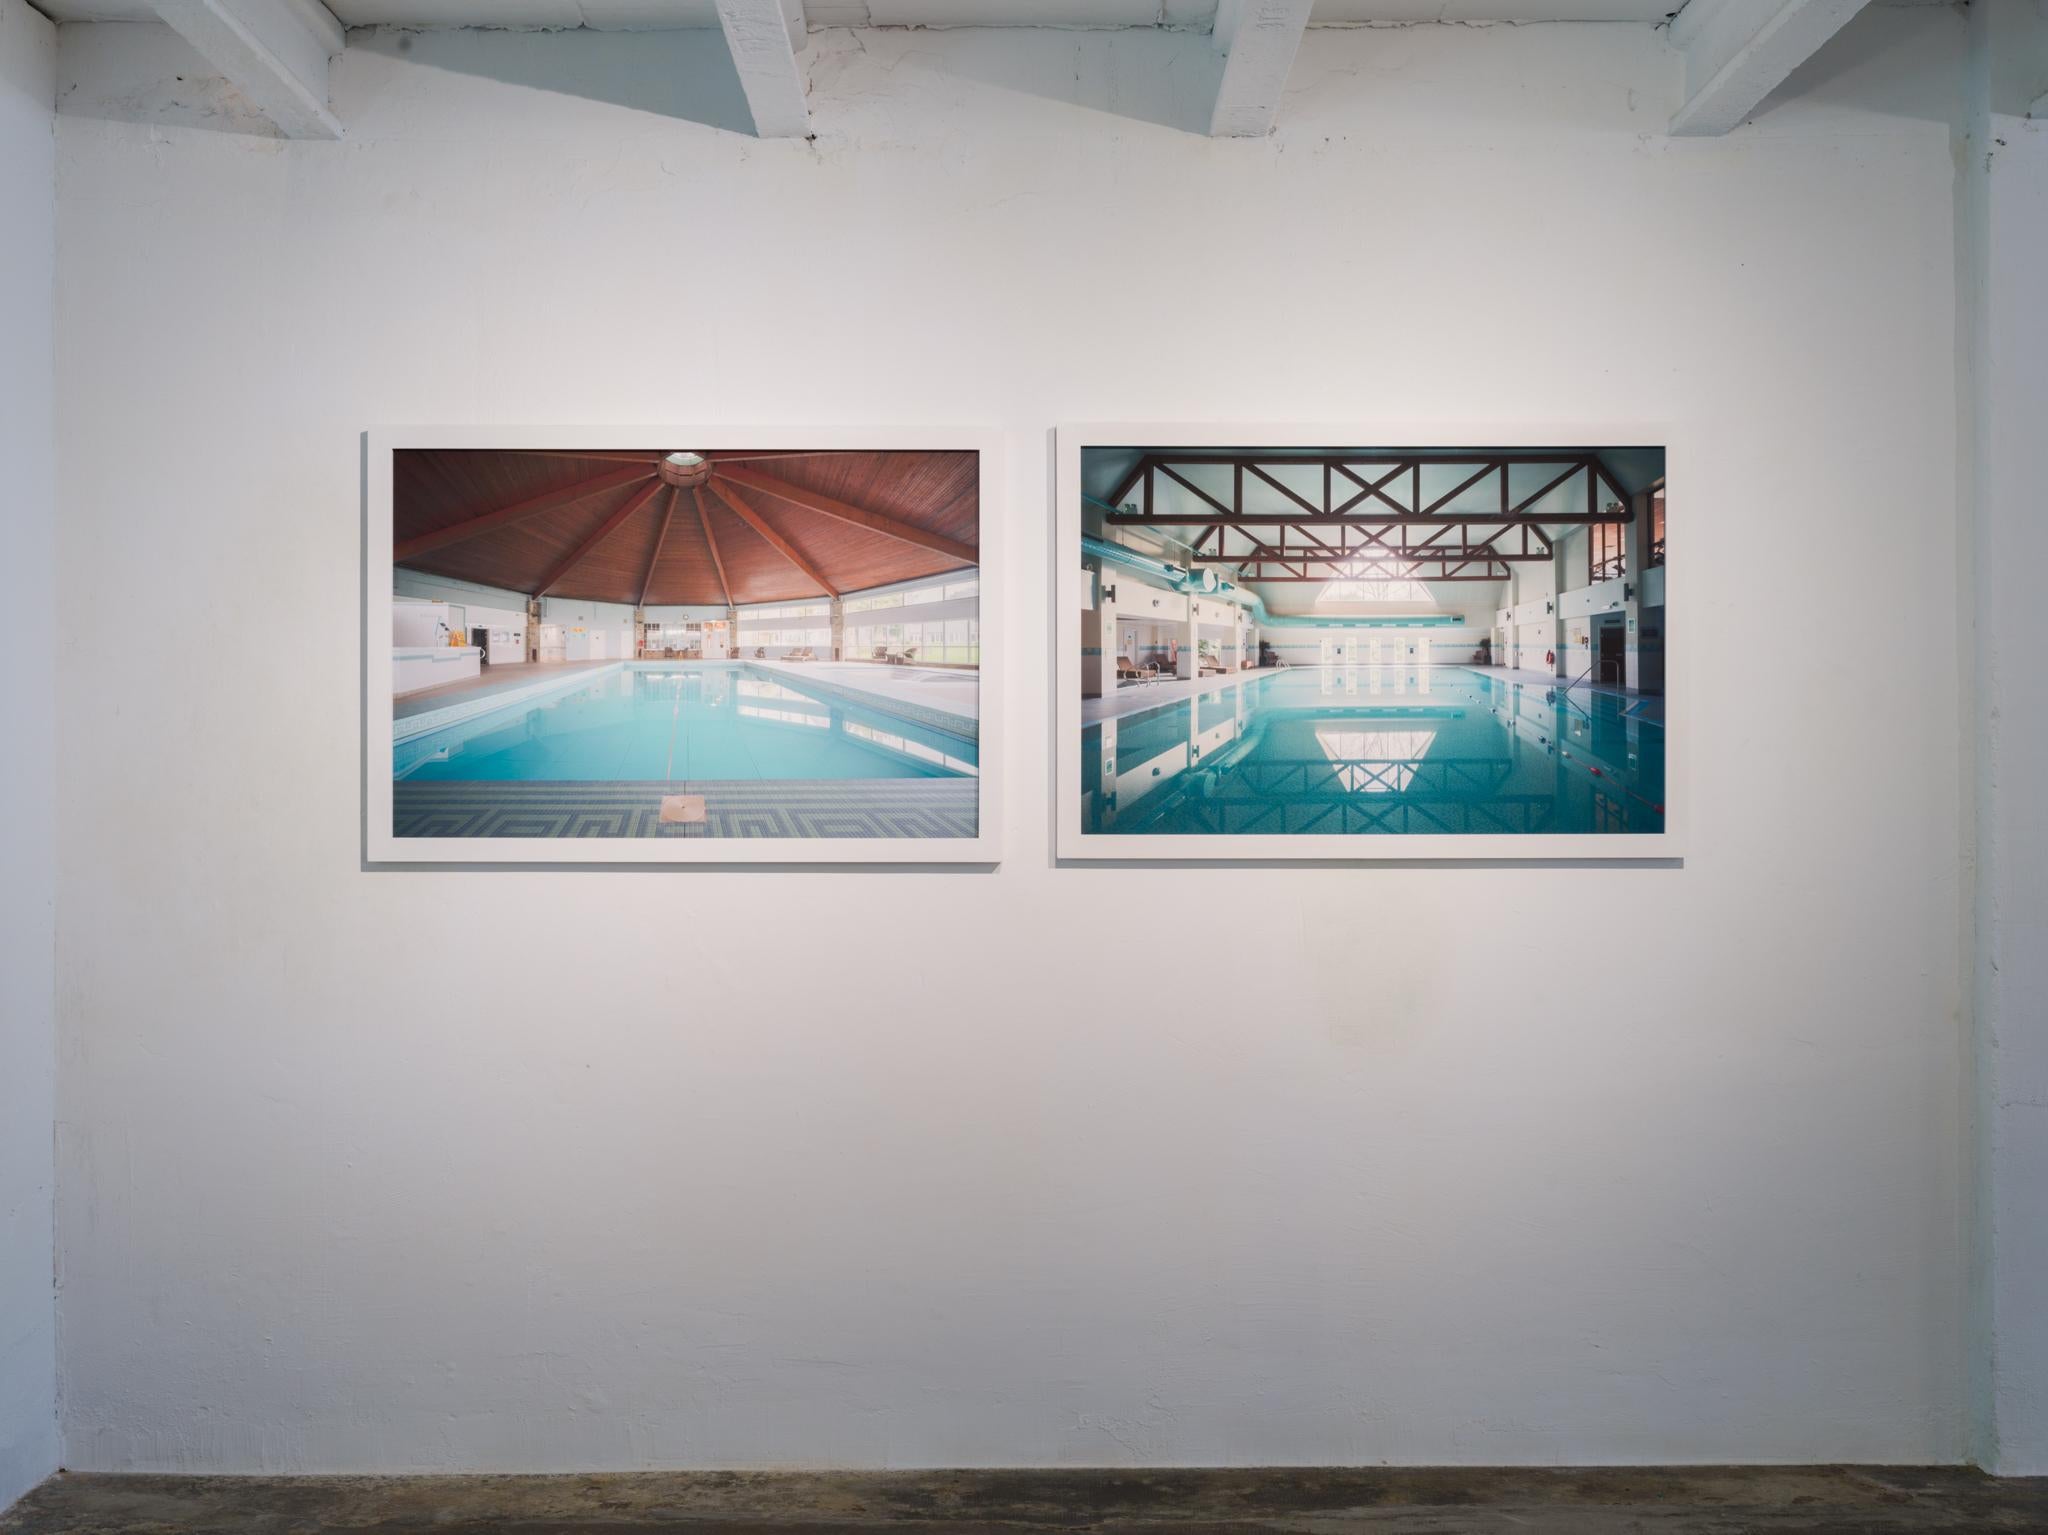 Architectural photo of a pool in British hotel. White frame, museum glass - Contemporary Photograph by Anna Dobrovolskaya-Mints